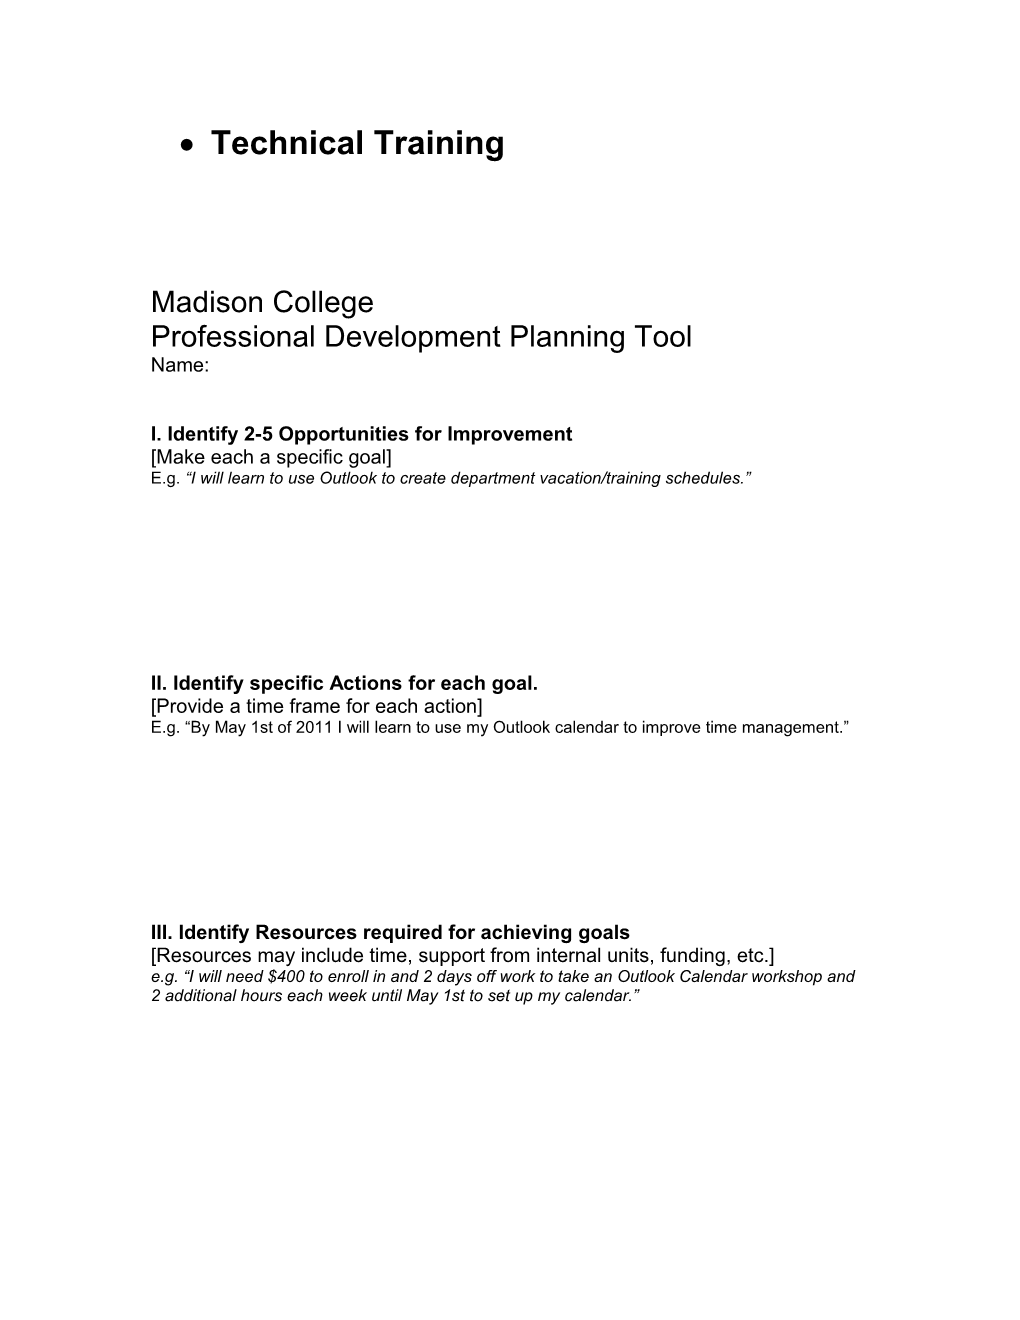 What Is in Your Professional Development Plan?